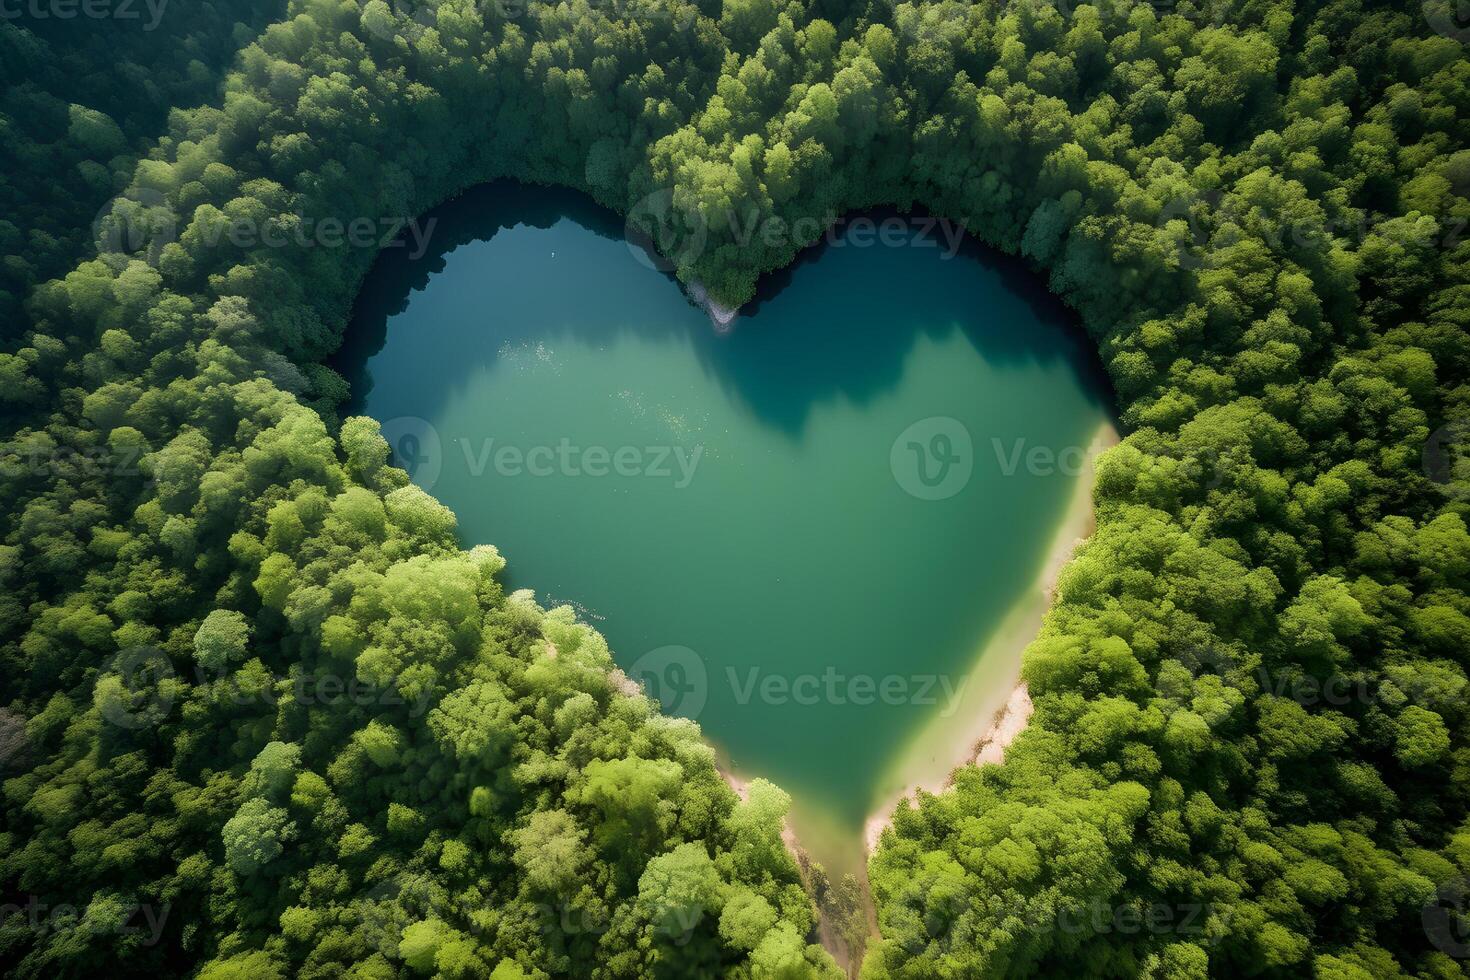 heart-shaped pond in the center of a dense forest, captured from an aerial view. The pond is surrounded by lush greenery and trees,The water in the pond is calm and reflective.. photo